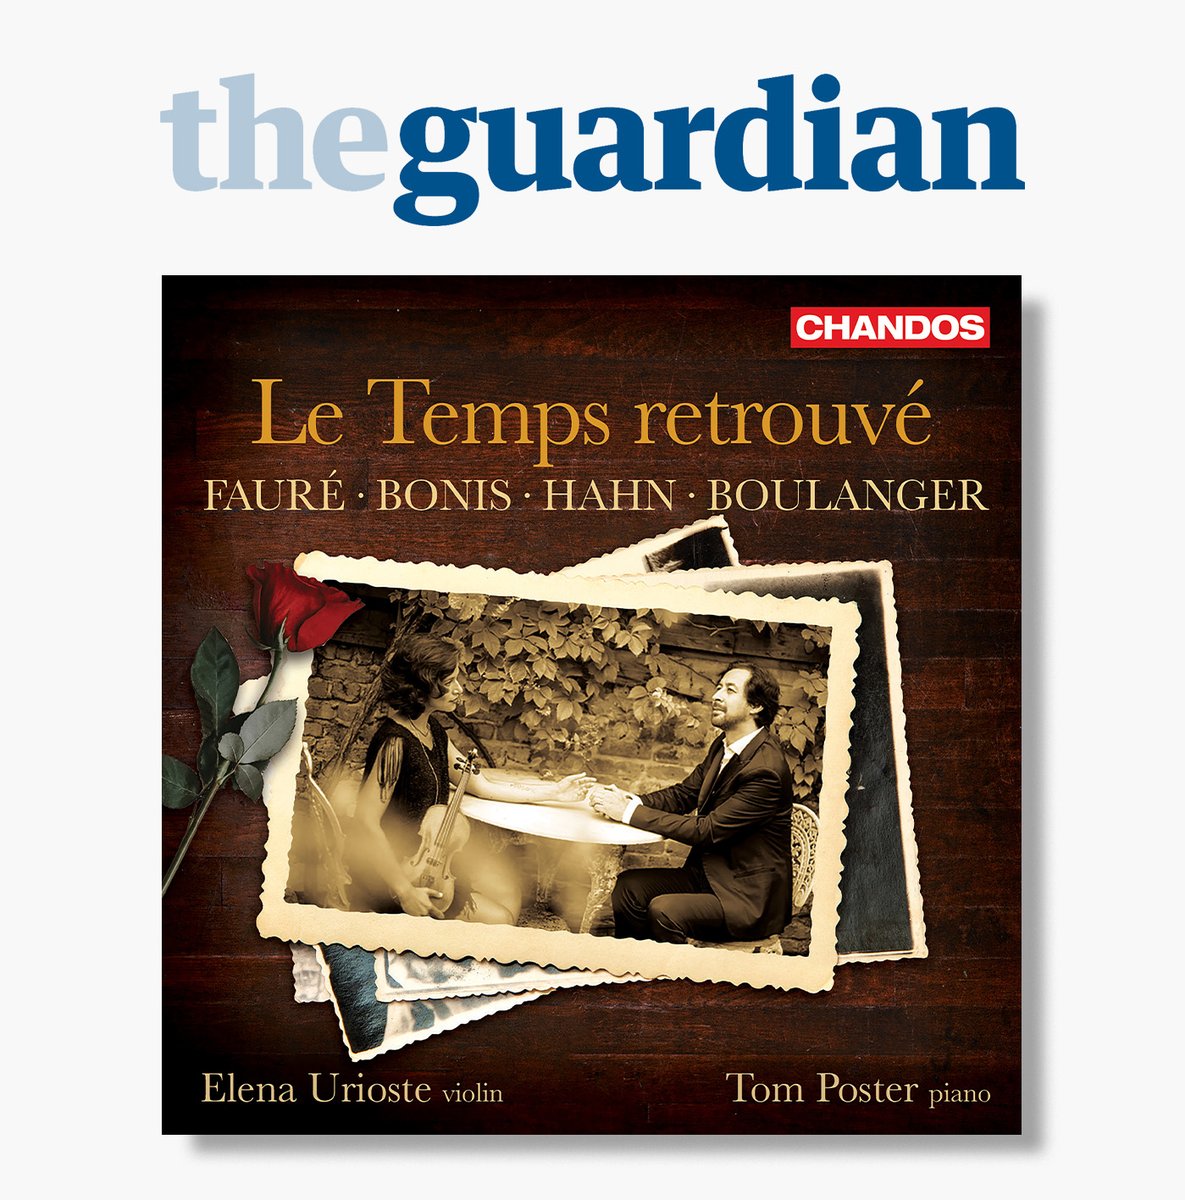 🚨Take a look at this article written by @ElenaUrioste and @PosterTom about their new album 'Le Temps retrouvé' featured in the @guardian ✨🎶 Read the article 📰tinyurl.com/yvuewm8a Listen to the album👉tinyurl.com/57vf9f6m